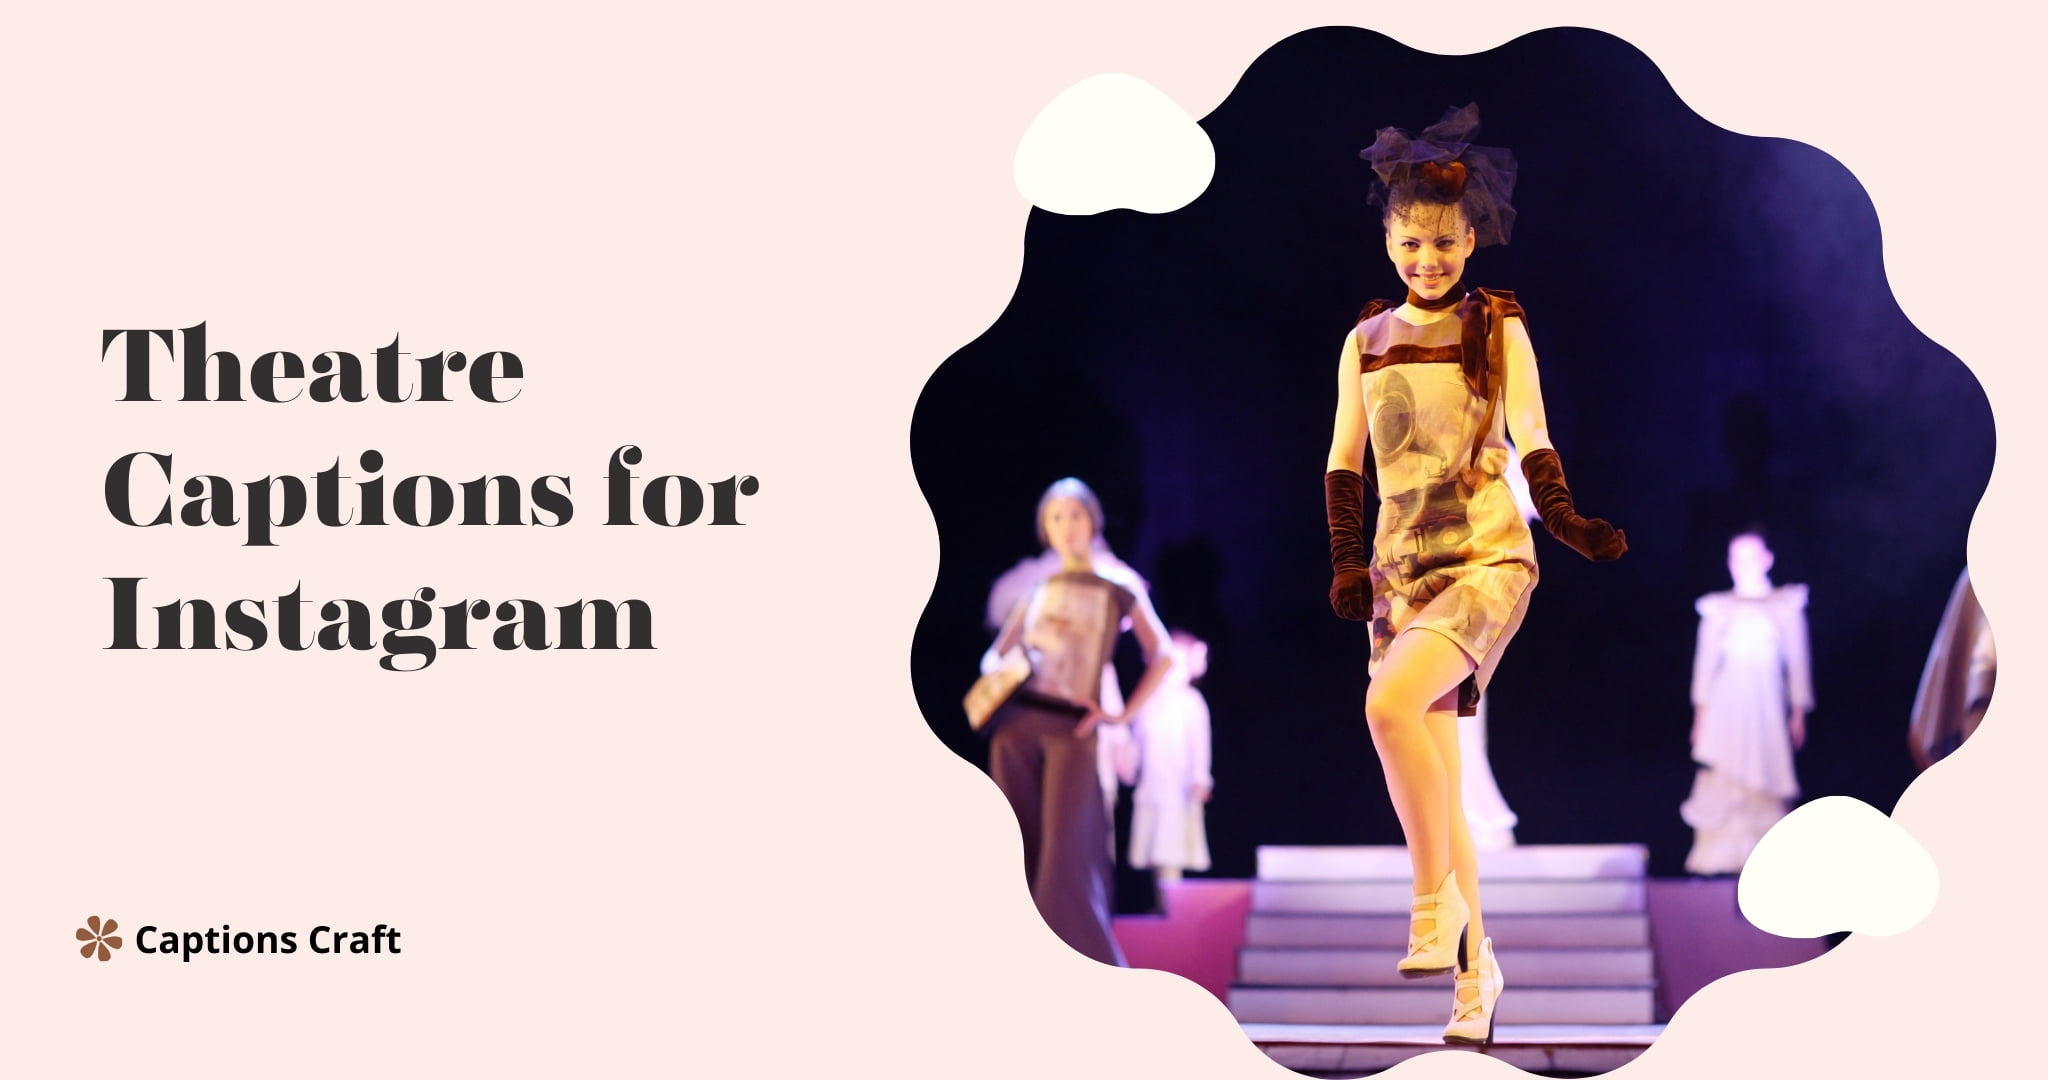 Theatre captions for Instagram: A collection of creative and engaging captions to enhance your theatre-related posts on Instagram.